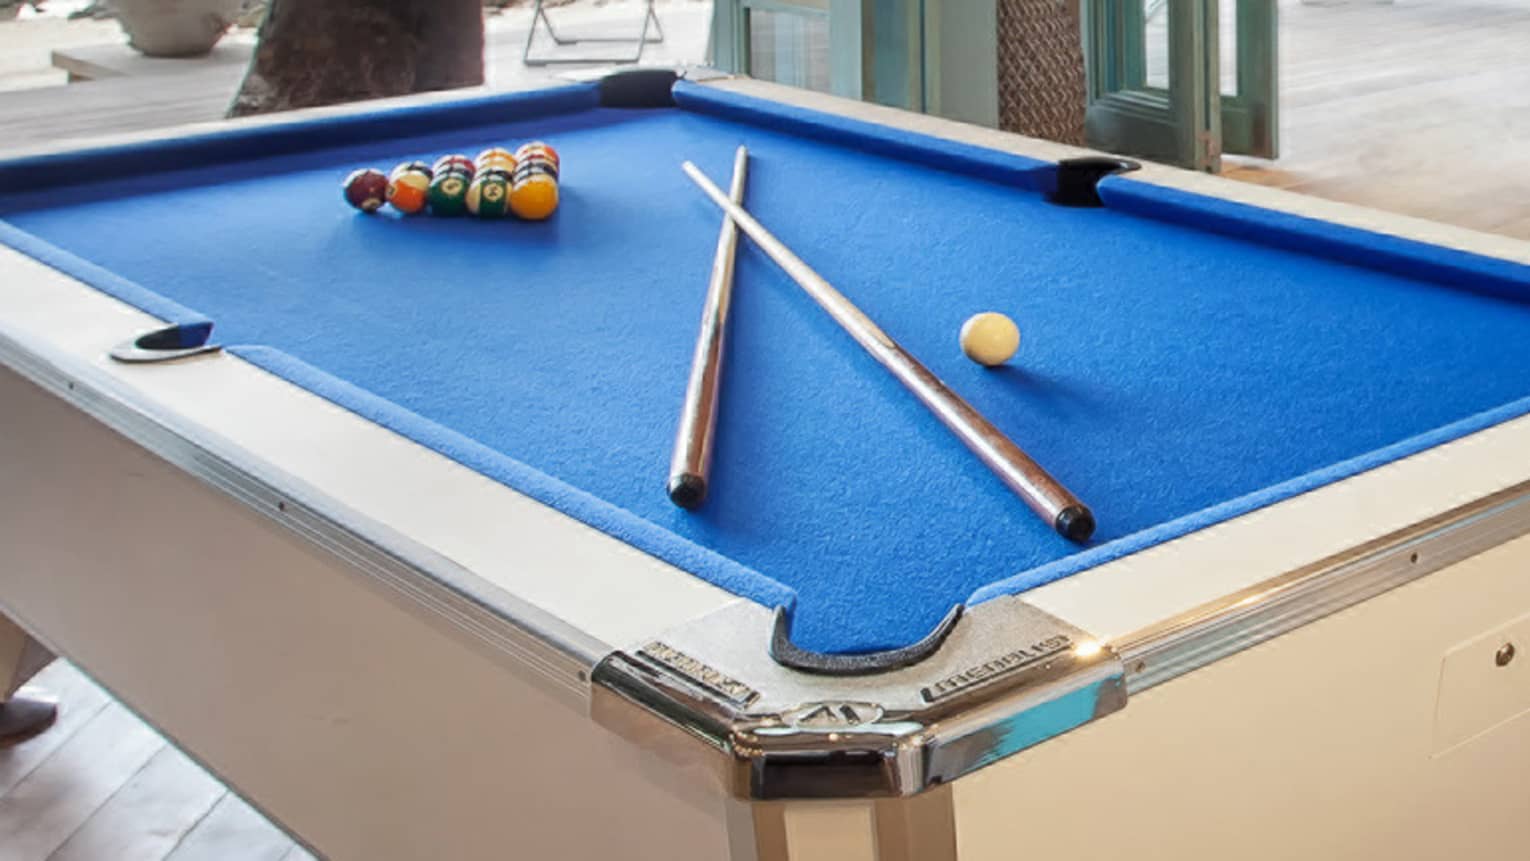 Blue billiards table with pool balls, sticks by seating area, open wall to patio